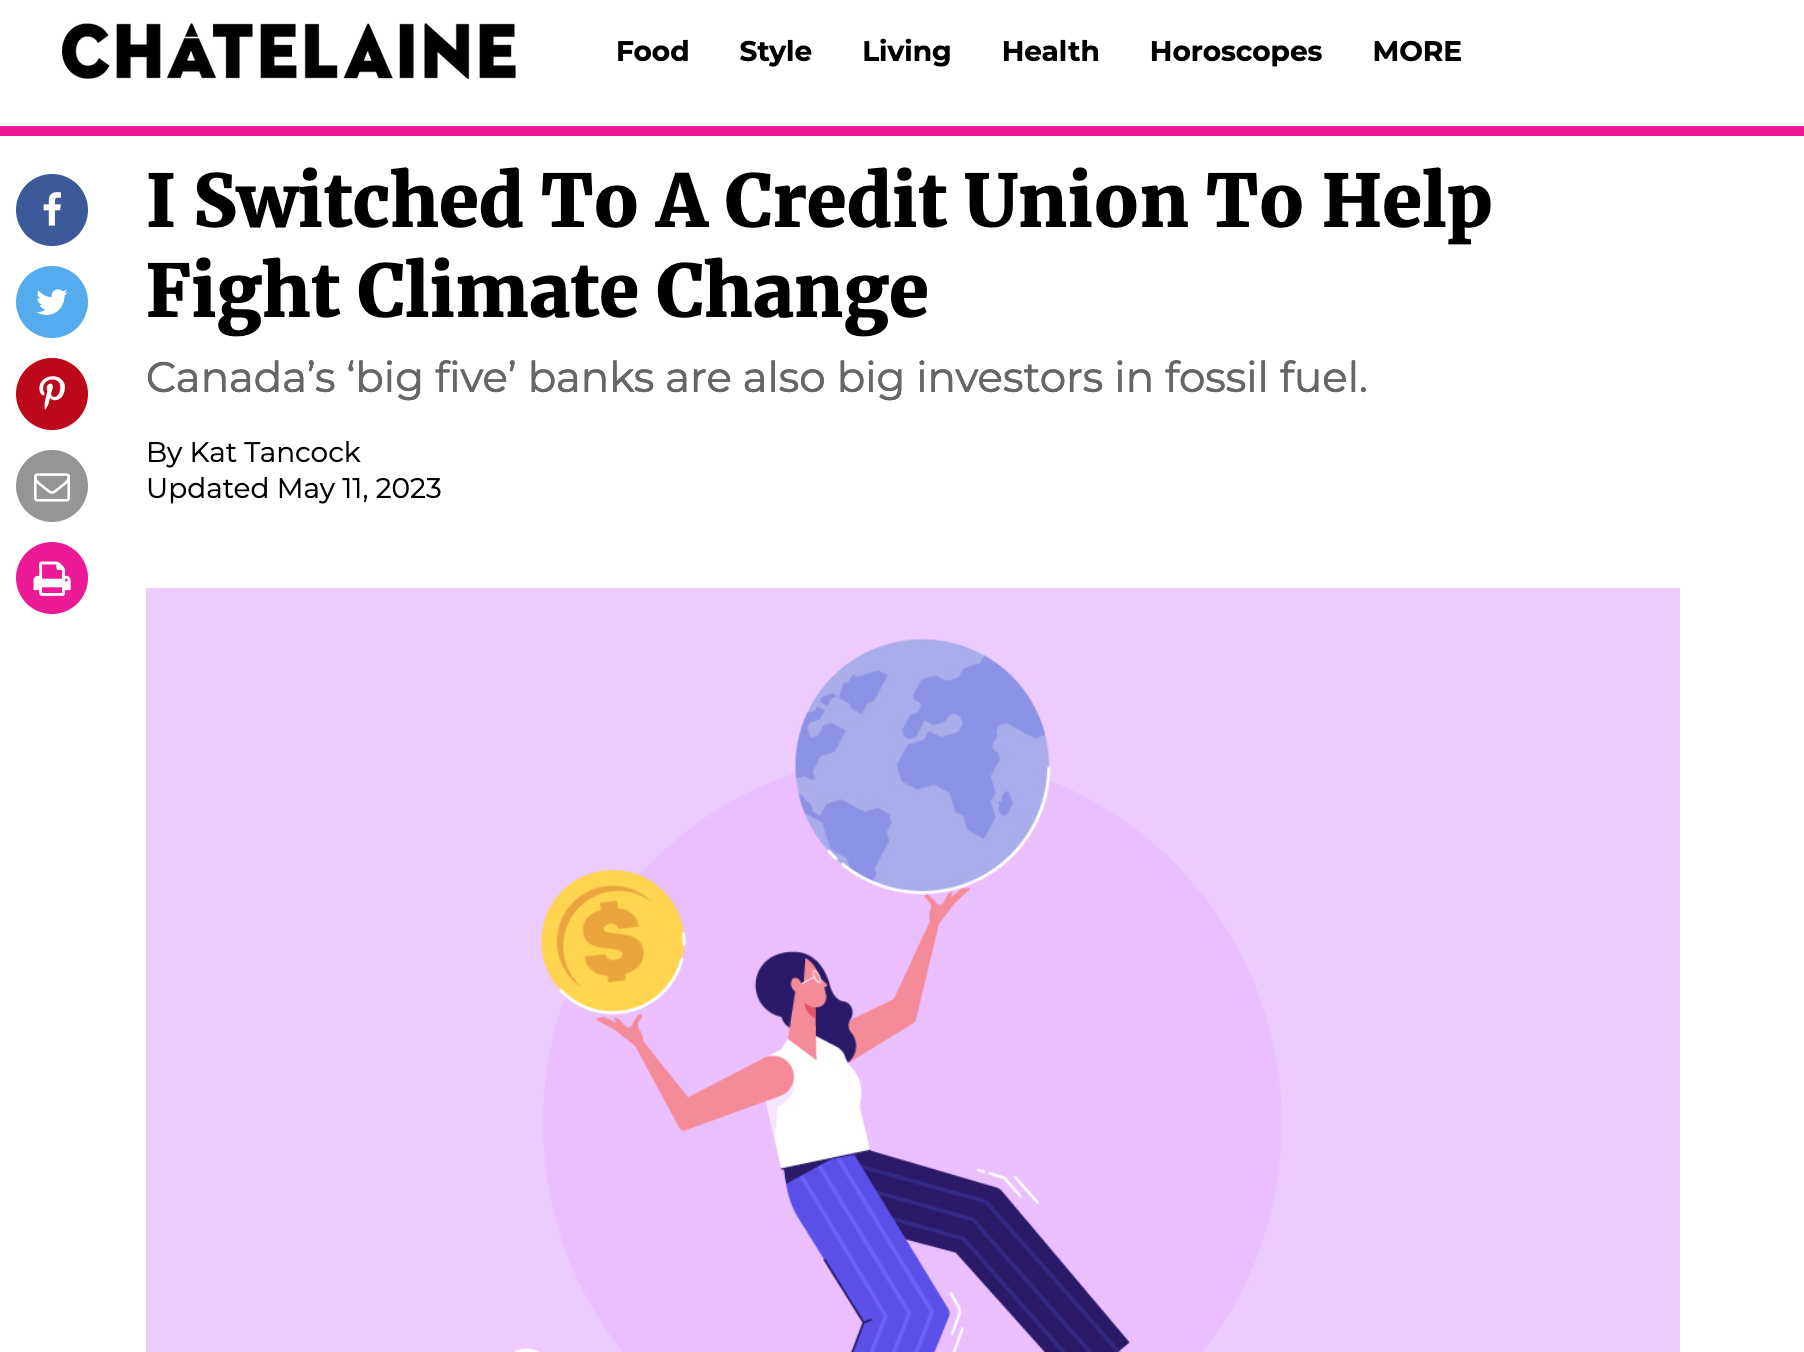 Chatelaine disses RBC over climate, Indigenous rights harms